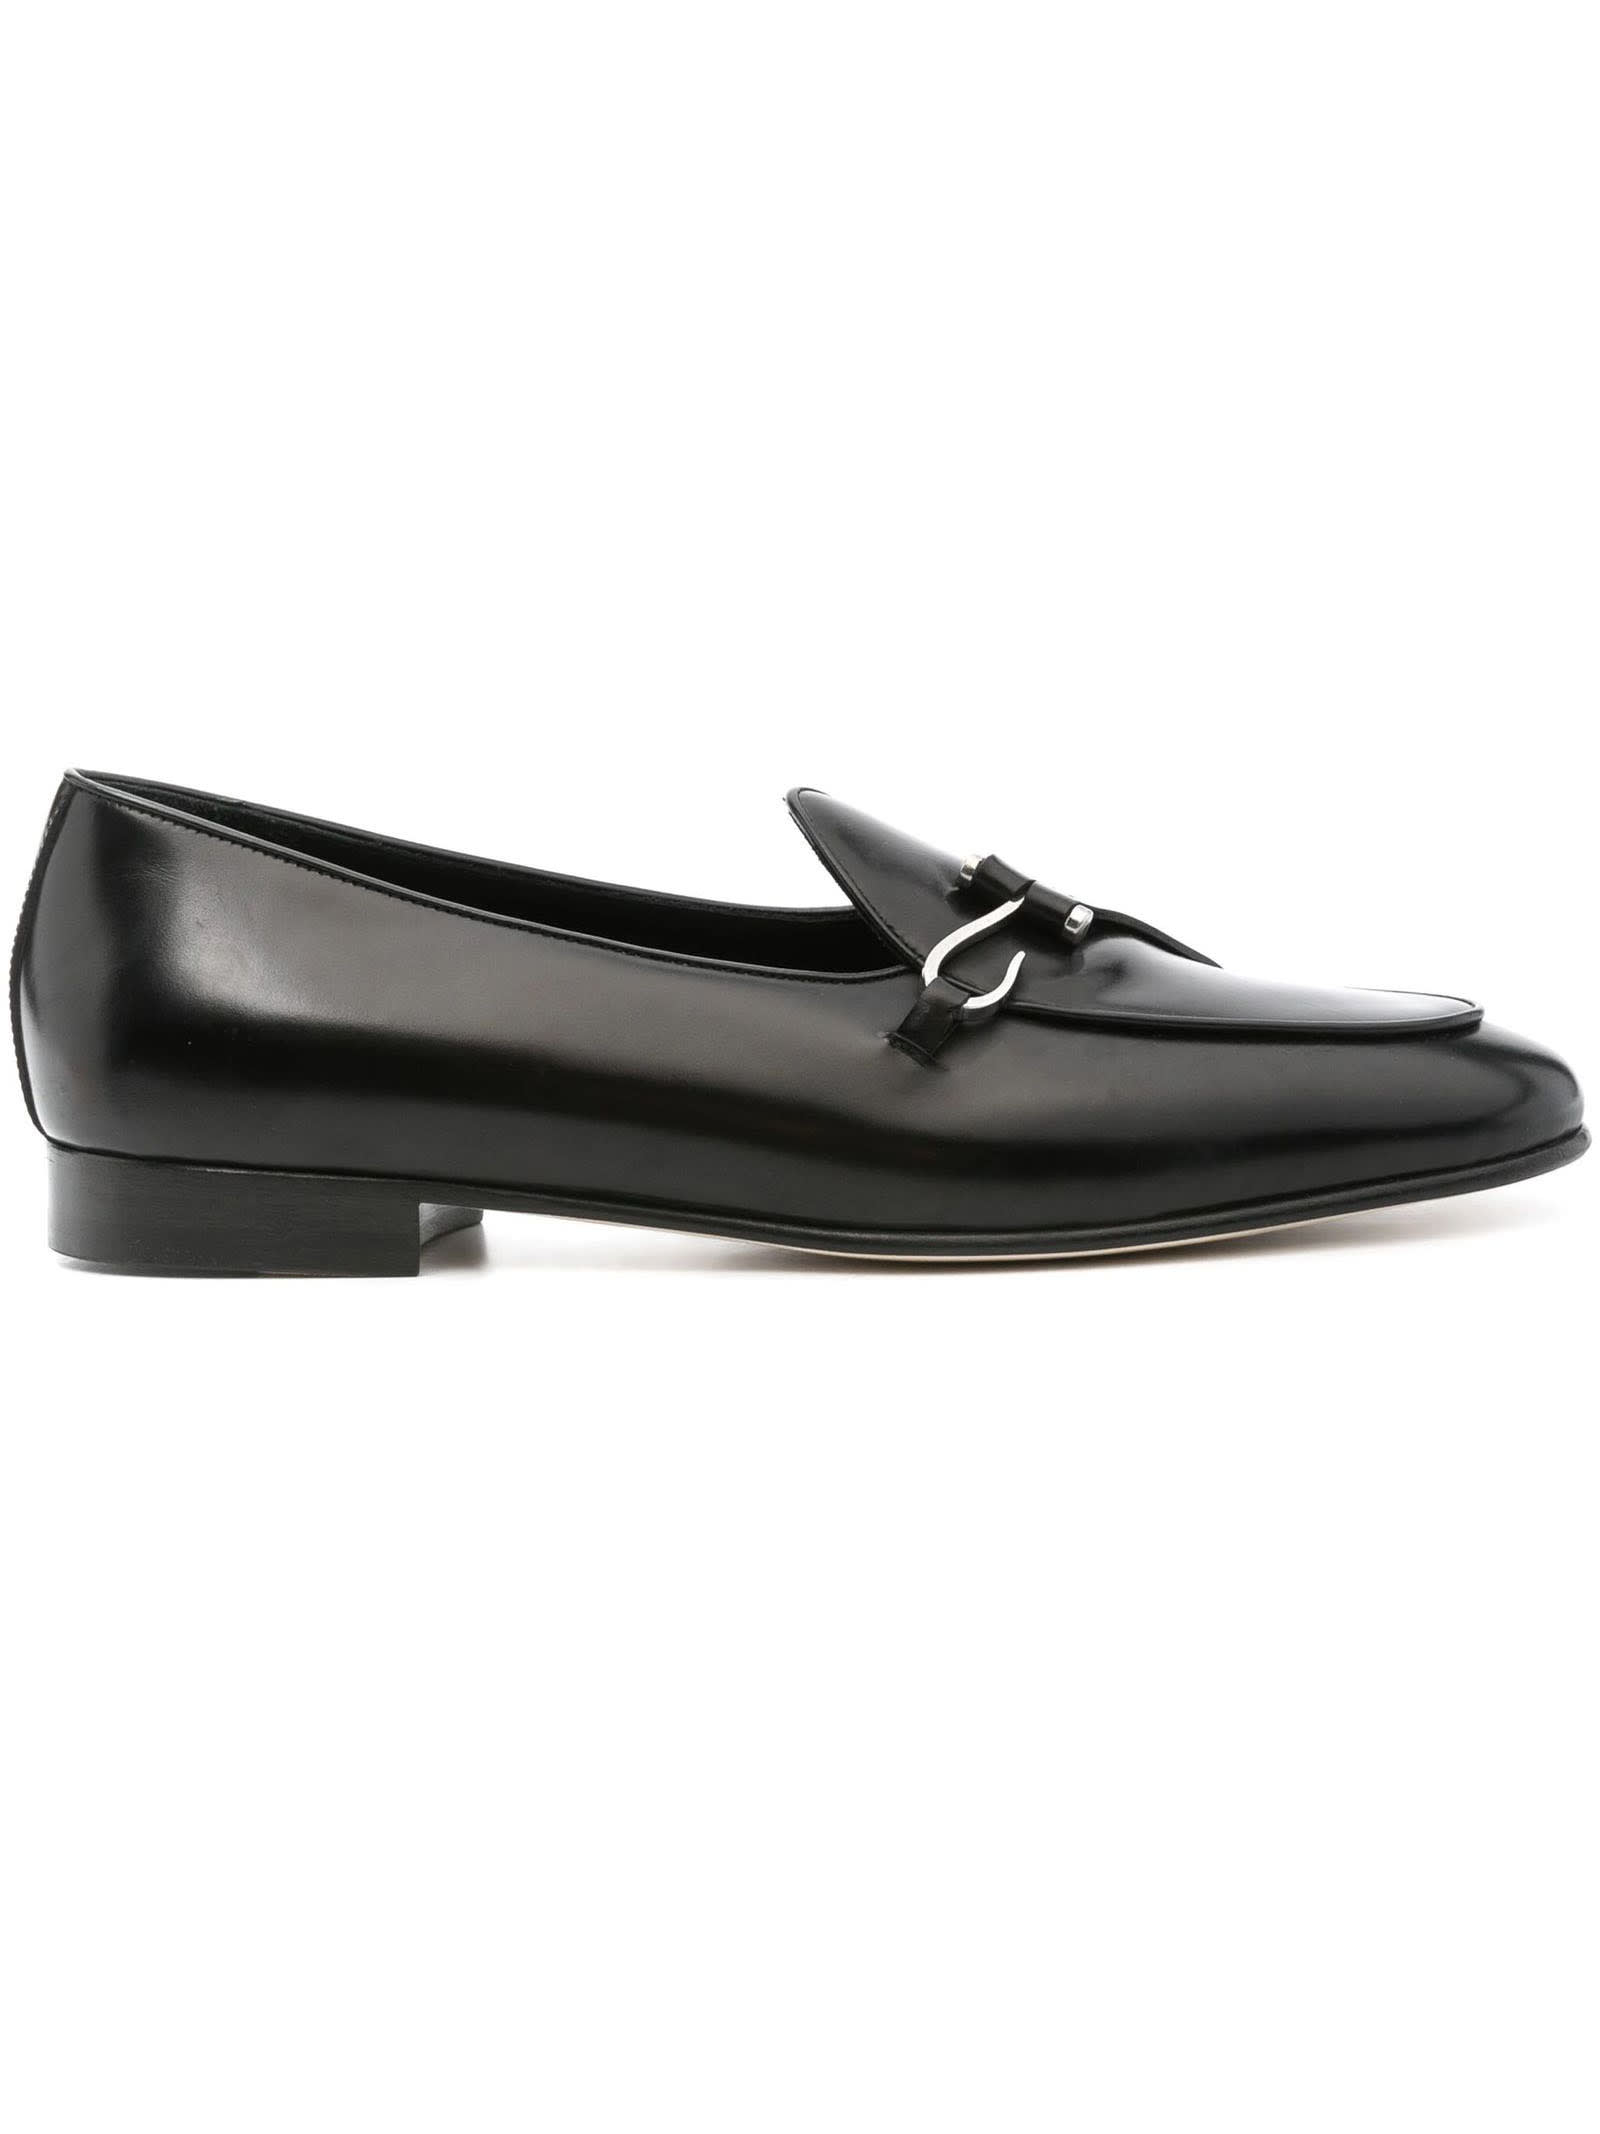 Black Calf Leather Comporta Loafers